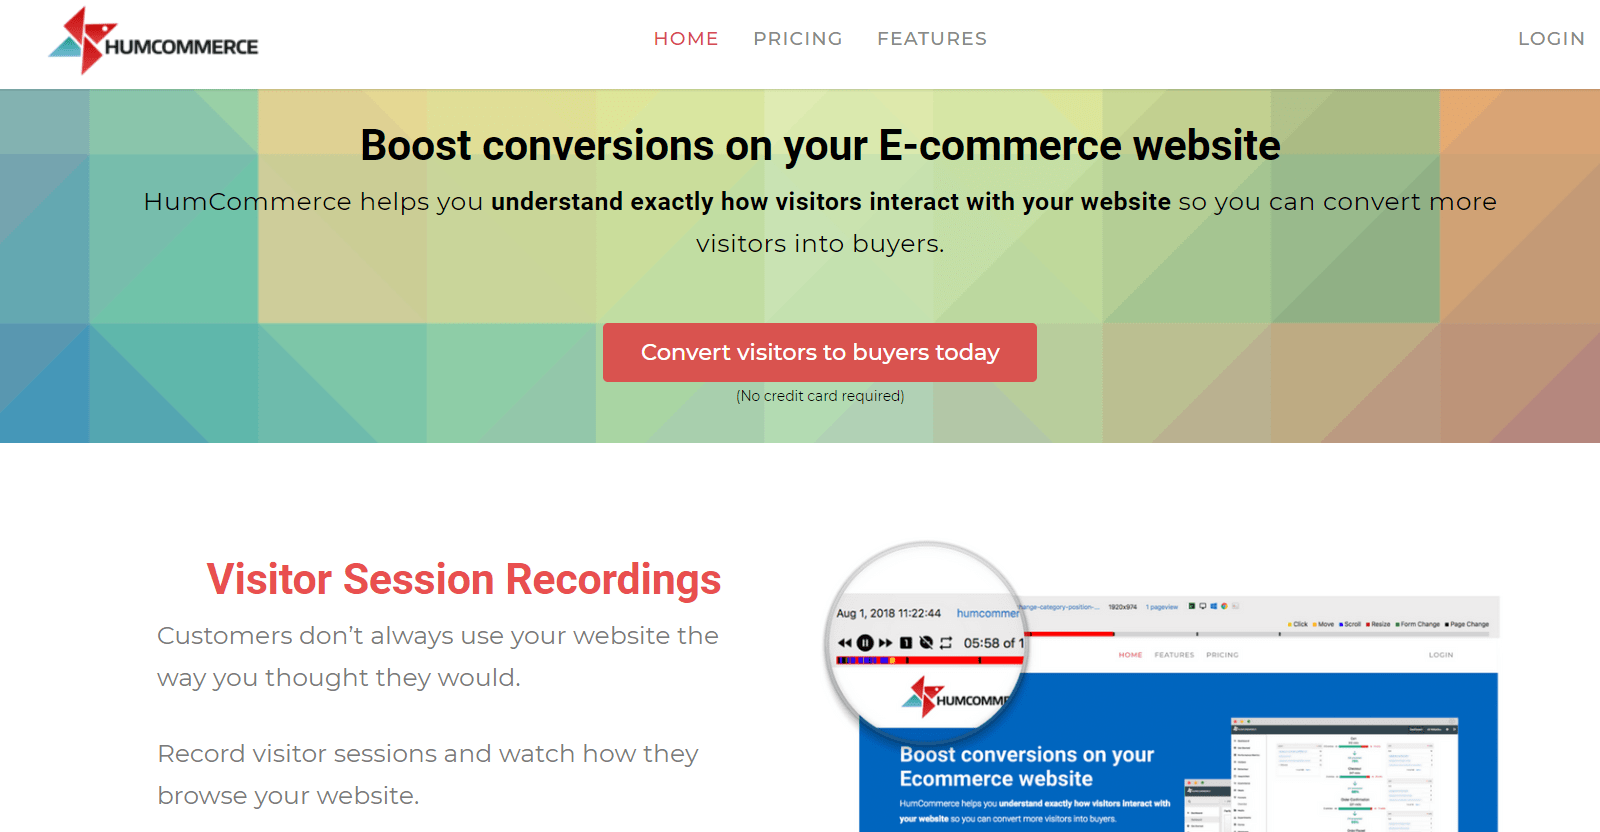 HumCommerce-Review-All-In-One-Tool-For-E-Commerce-Sites